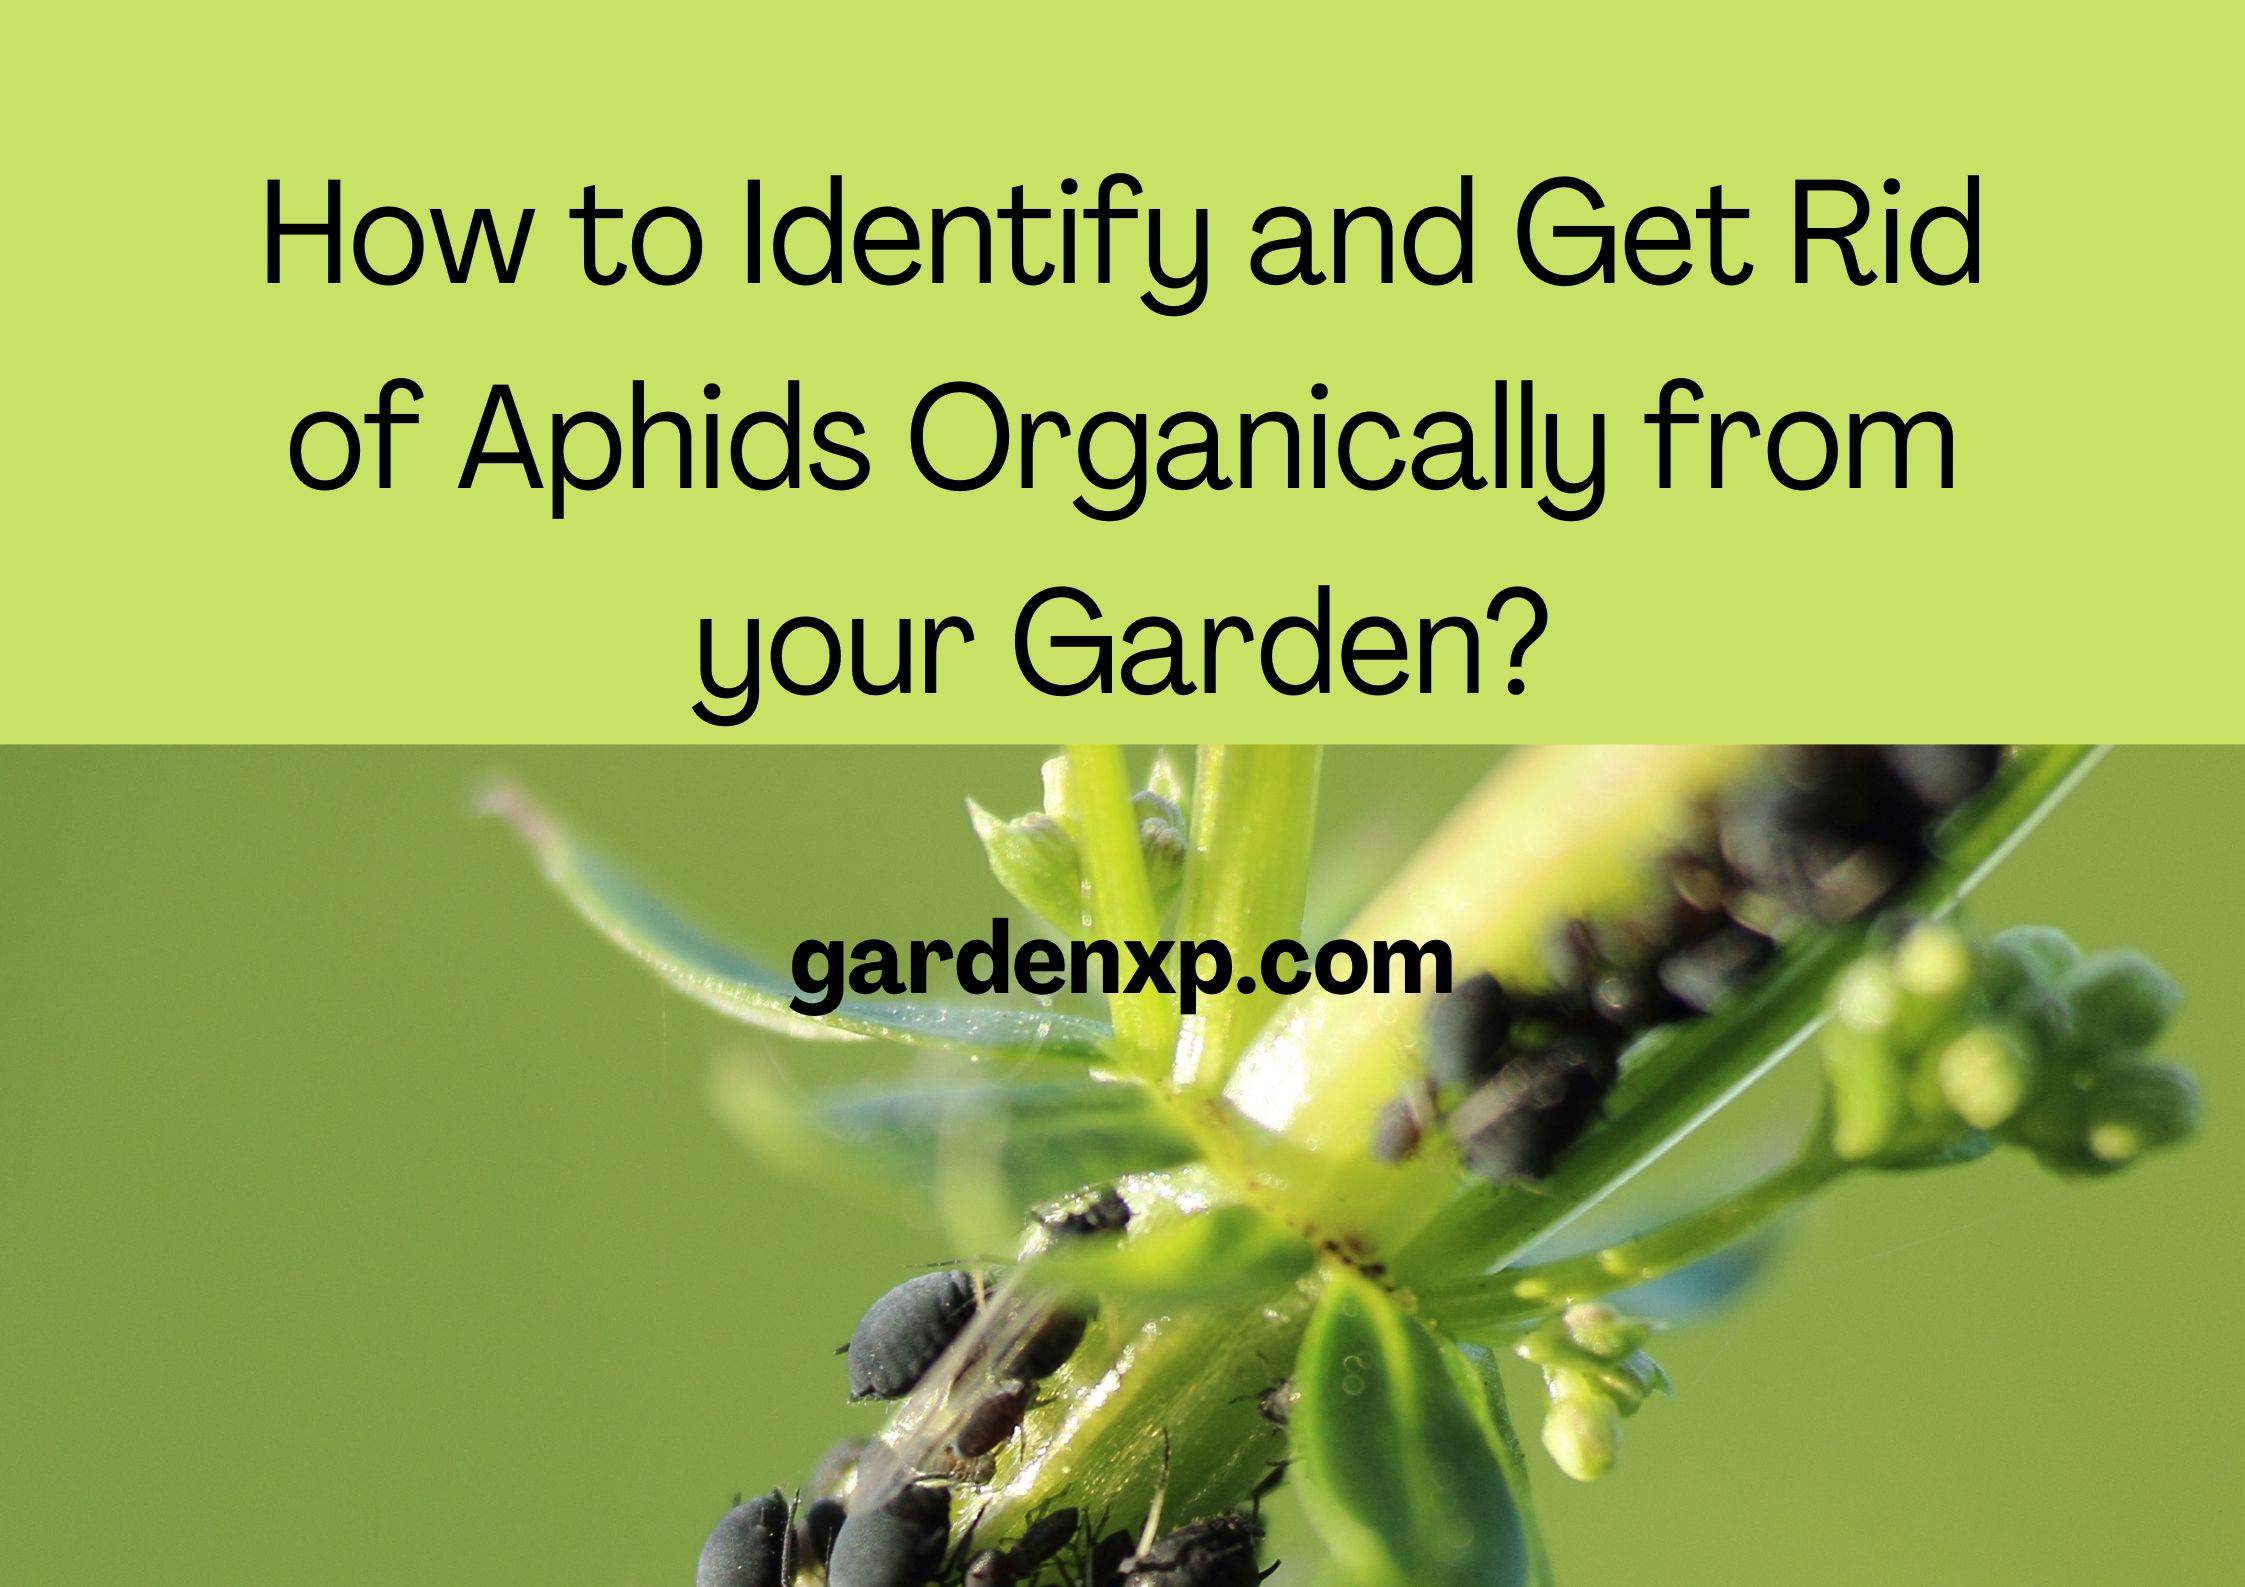 How to Identify and Get Rid of Aphids Organically from your Garden?